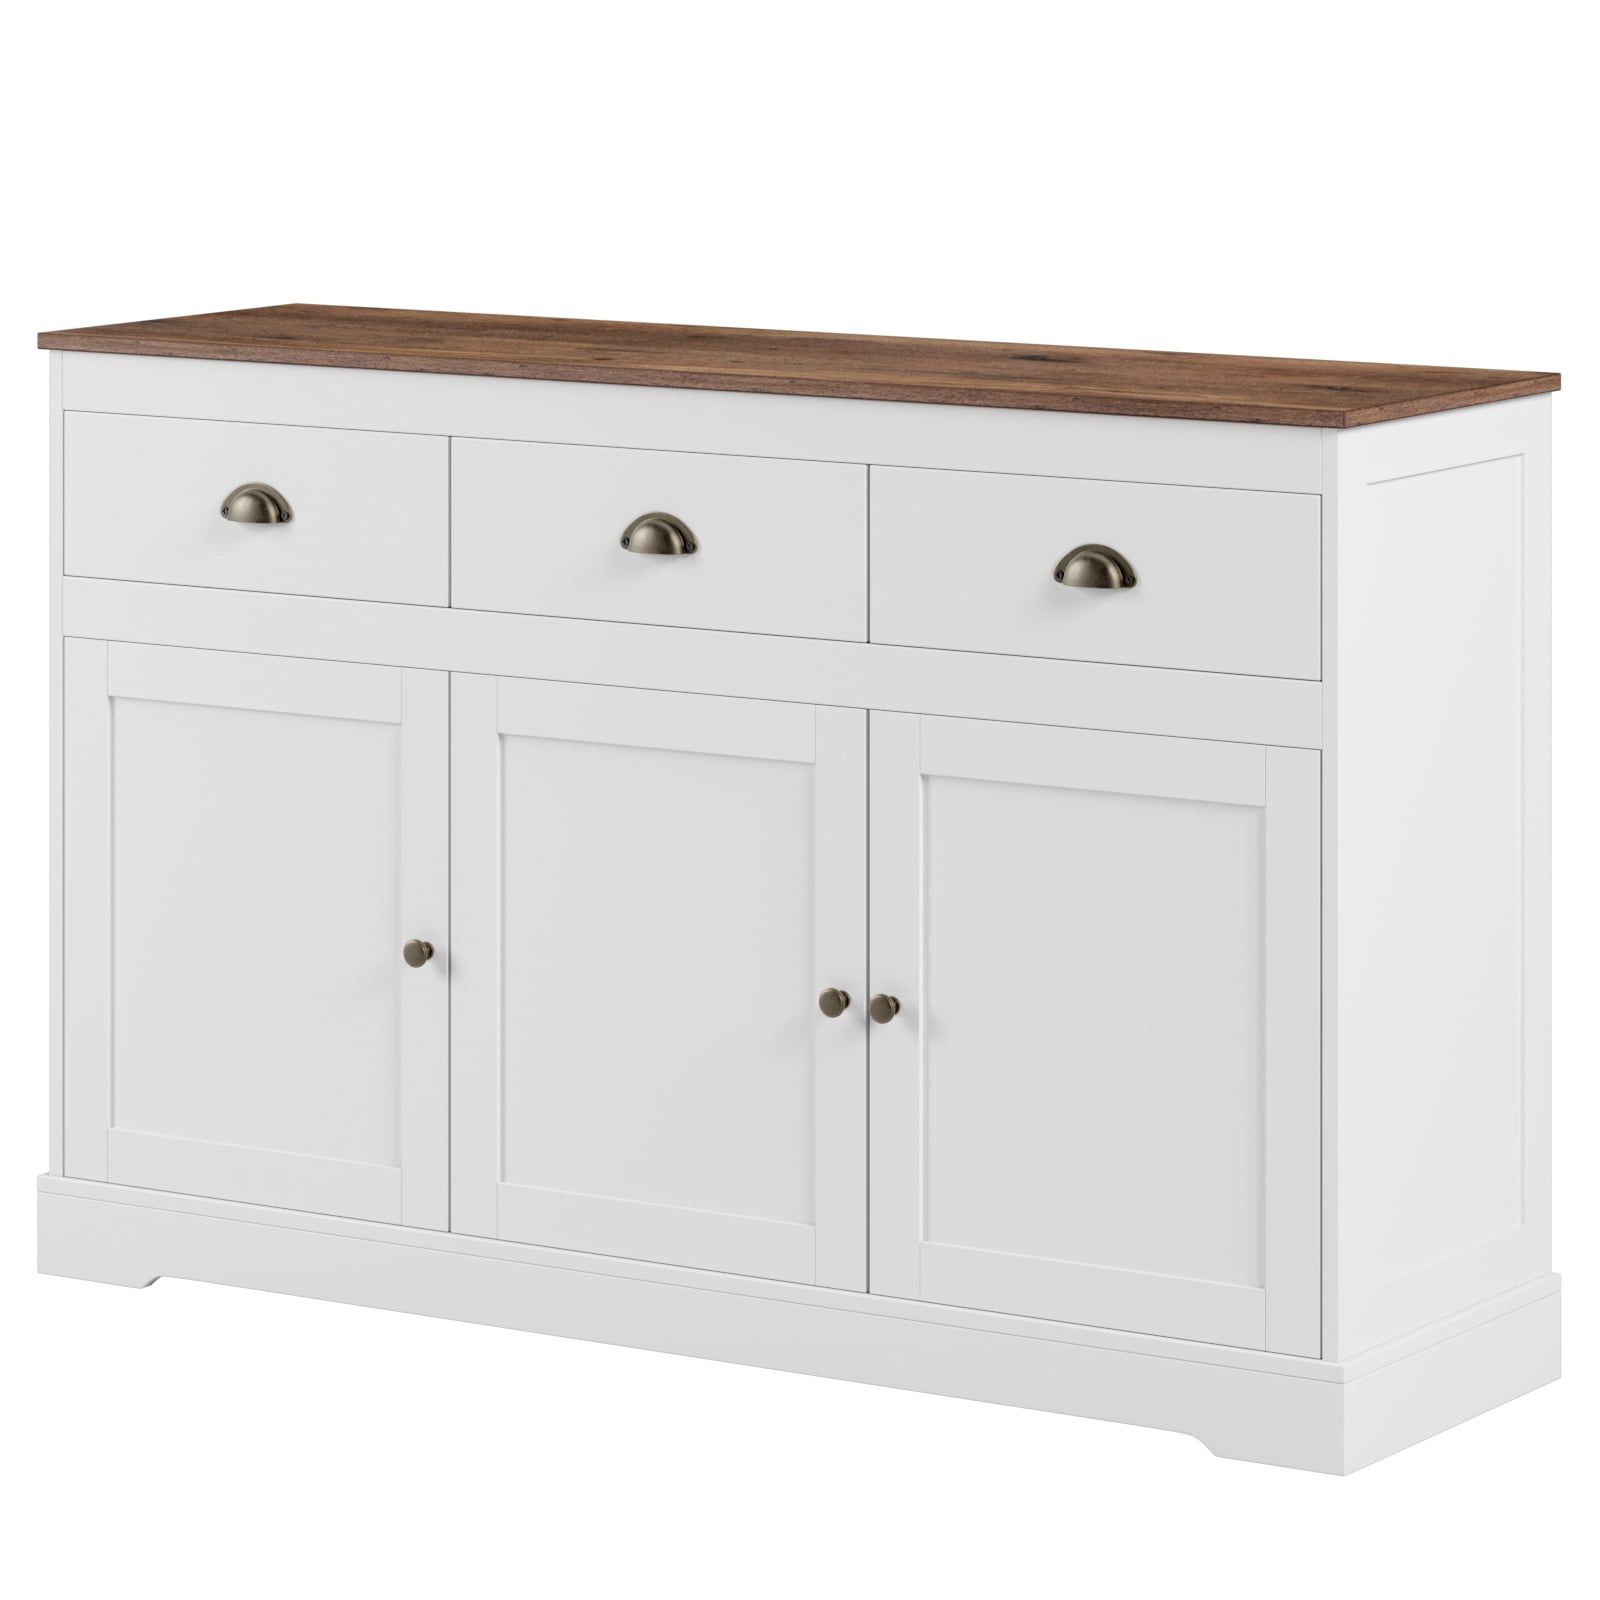 Homfa Sideboard Storage Cabinet With 3 Drawers & 3 Doors,  (View 10 of 10)